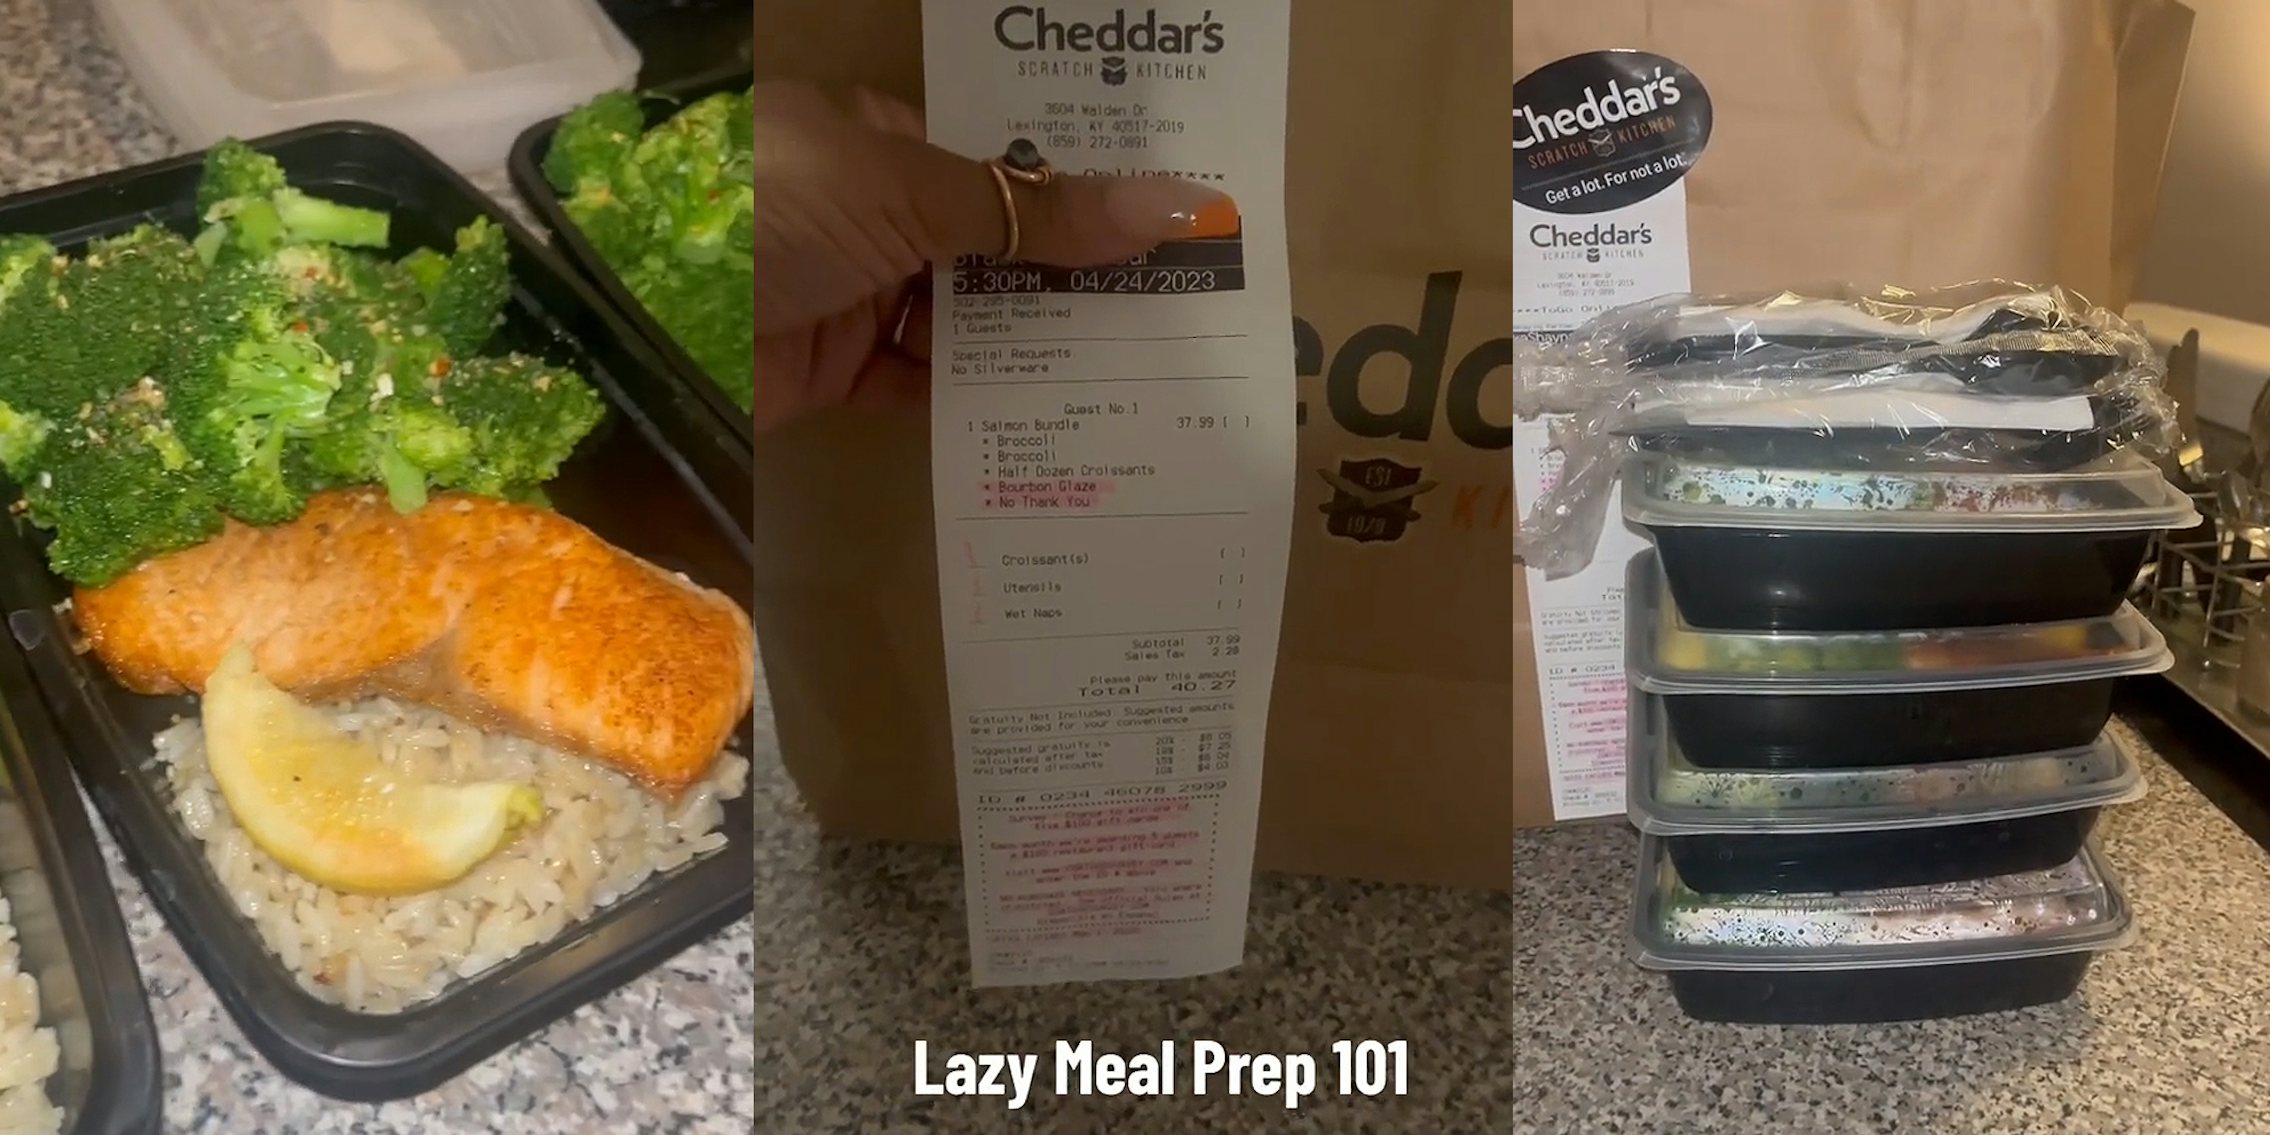 salmon with rice and broccoli in meal prep container (l) Cheddar's bag with food inside and receipt with caption 'Lazy Meal Prep 101' (c) 4 prepped meals in containers on counter (r)